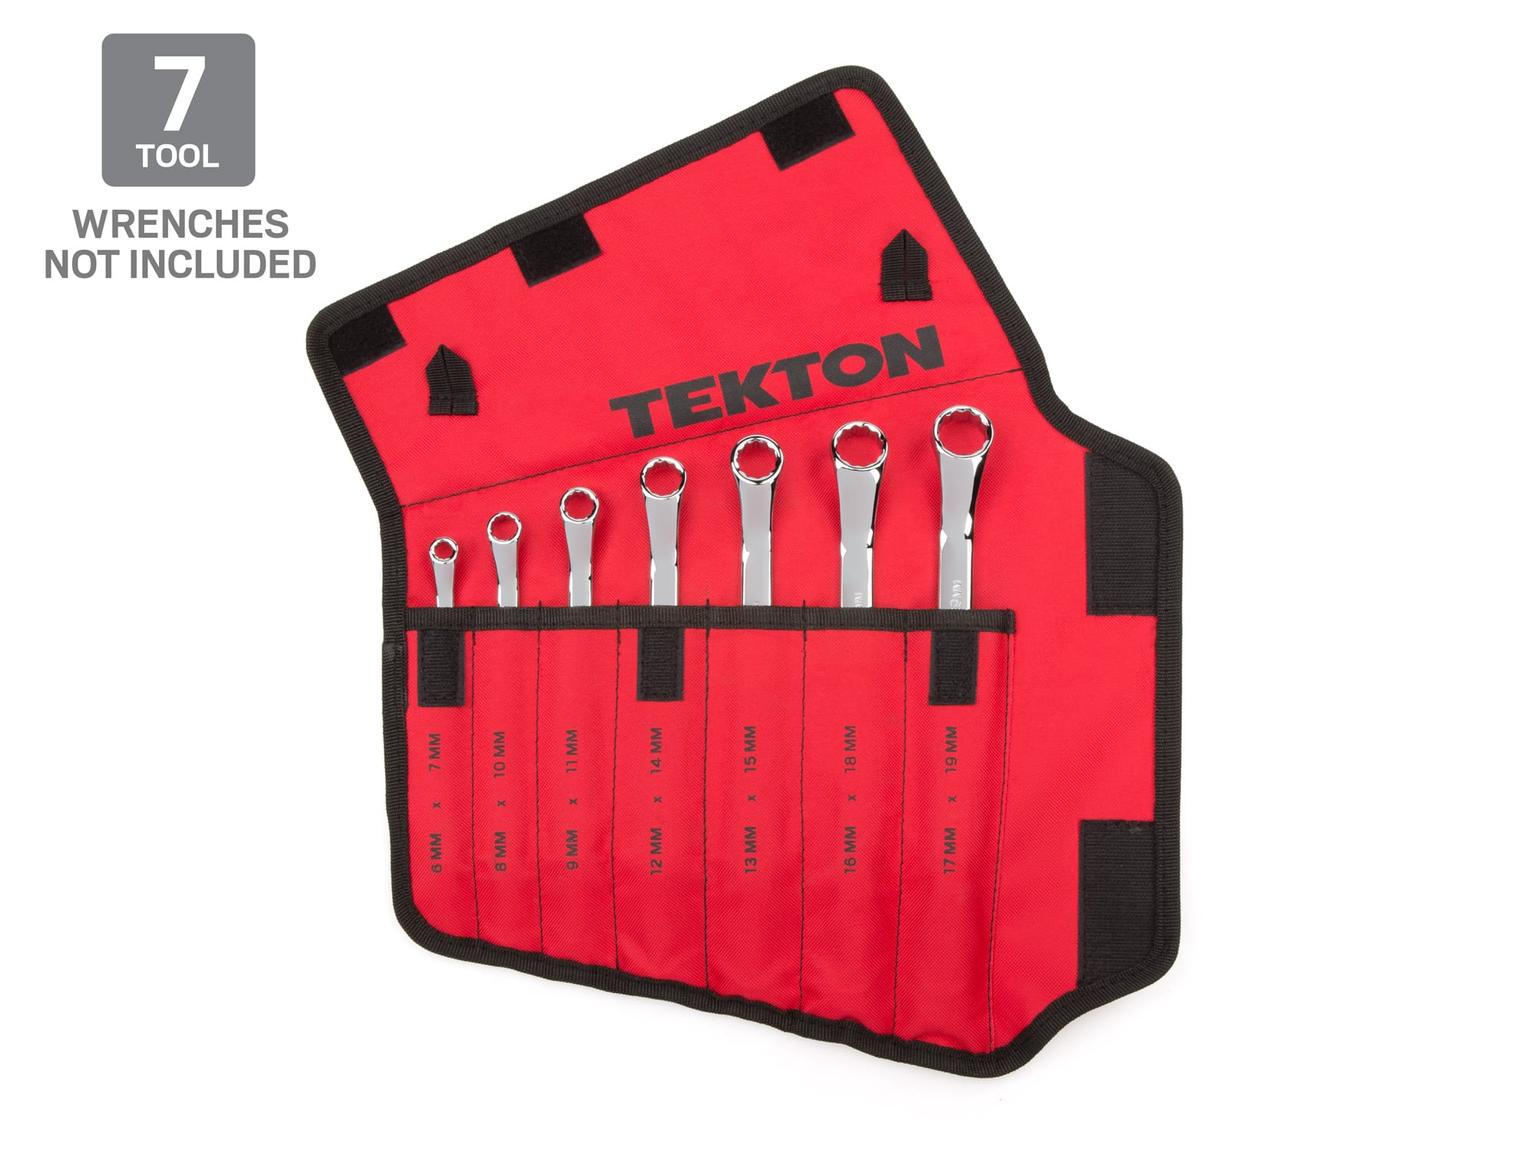 TEKTON ORG27807-T 7-Tool Box End Wrench Pouch (6-19 mm)